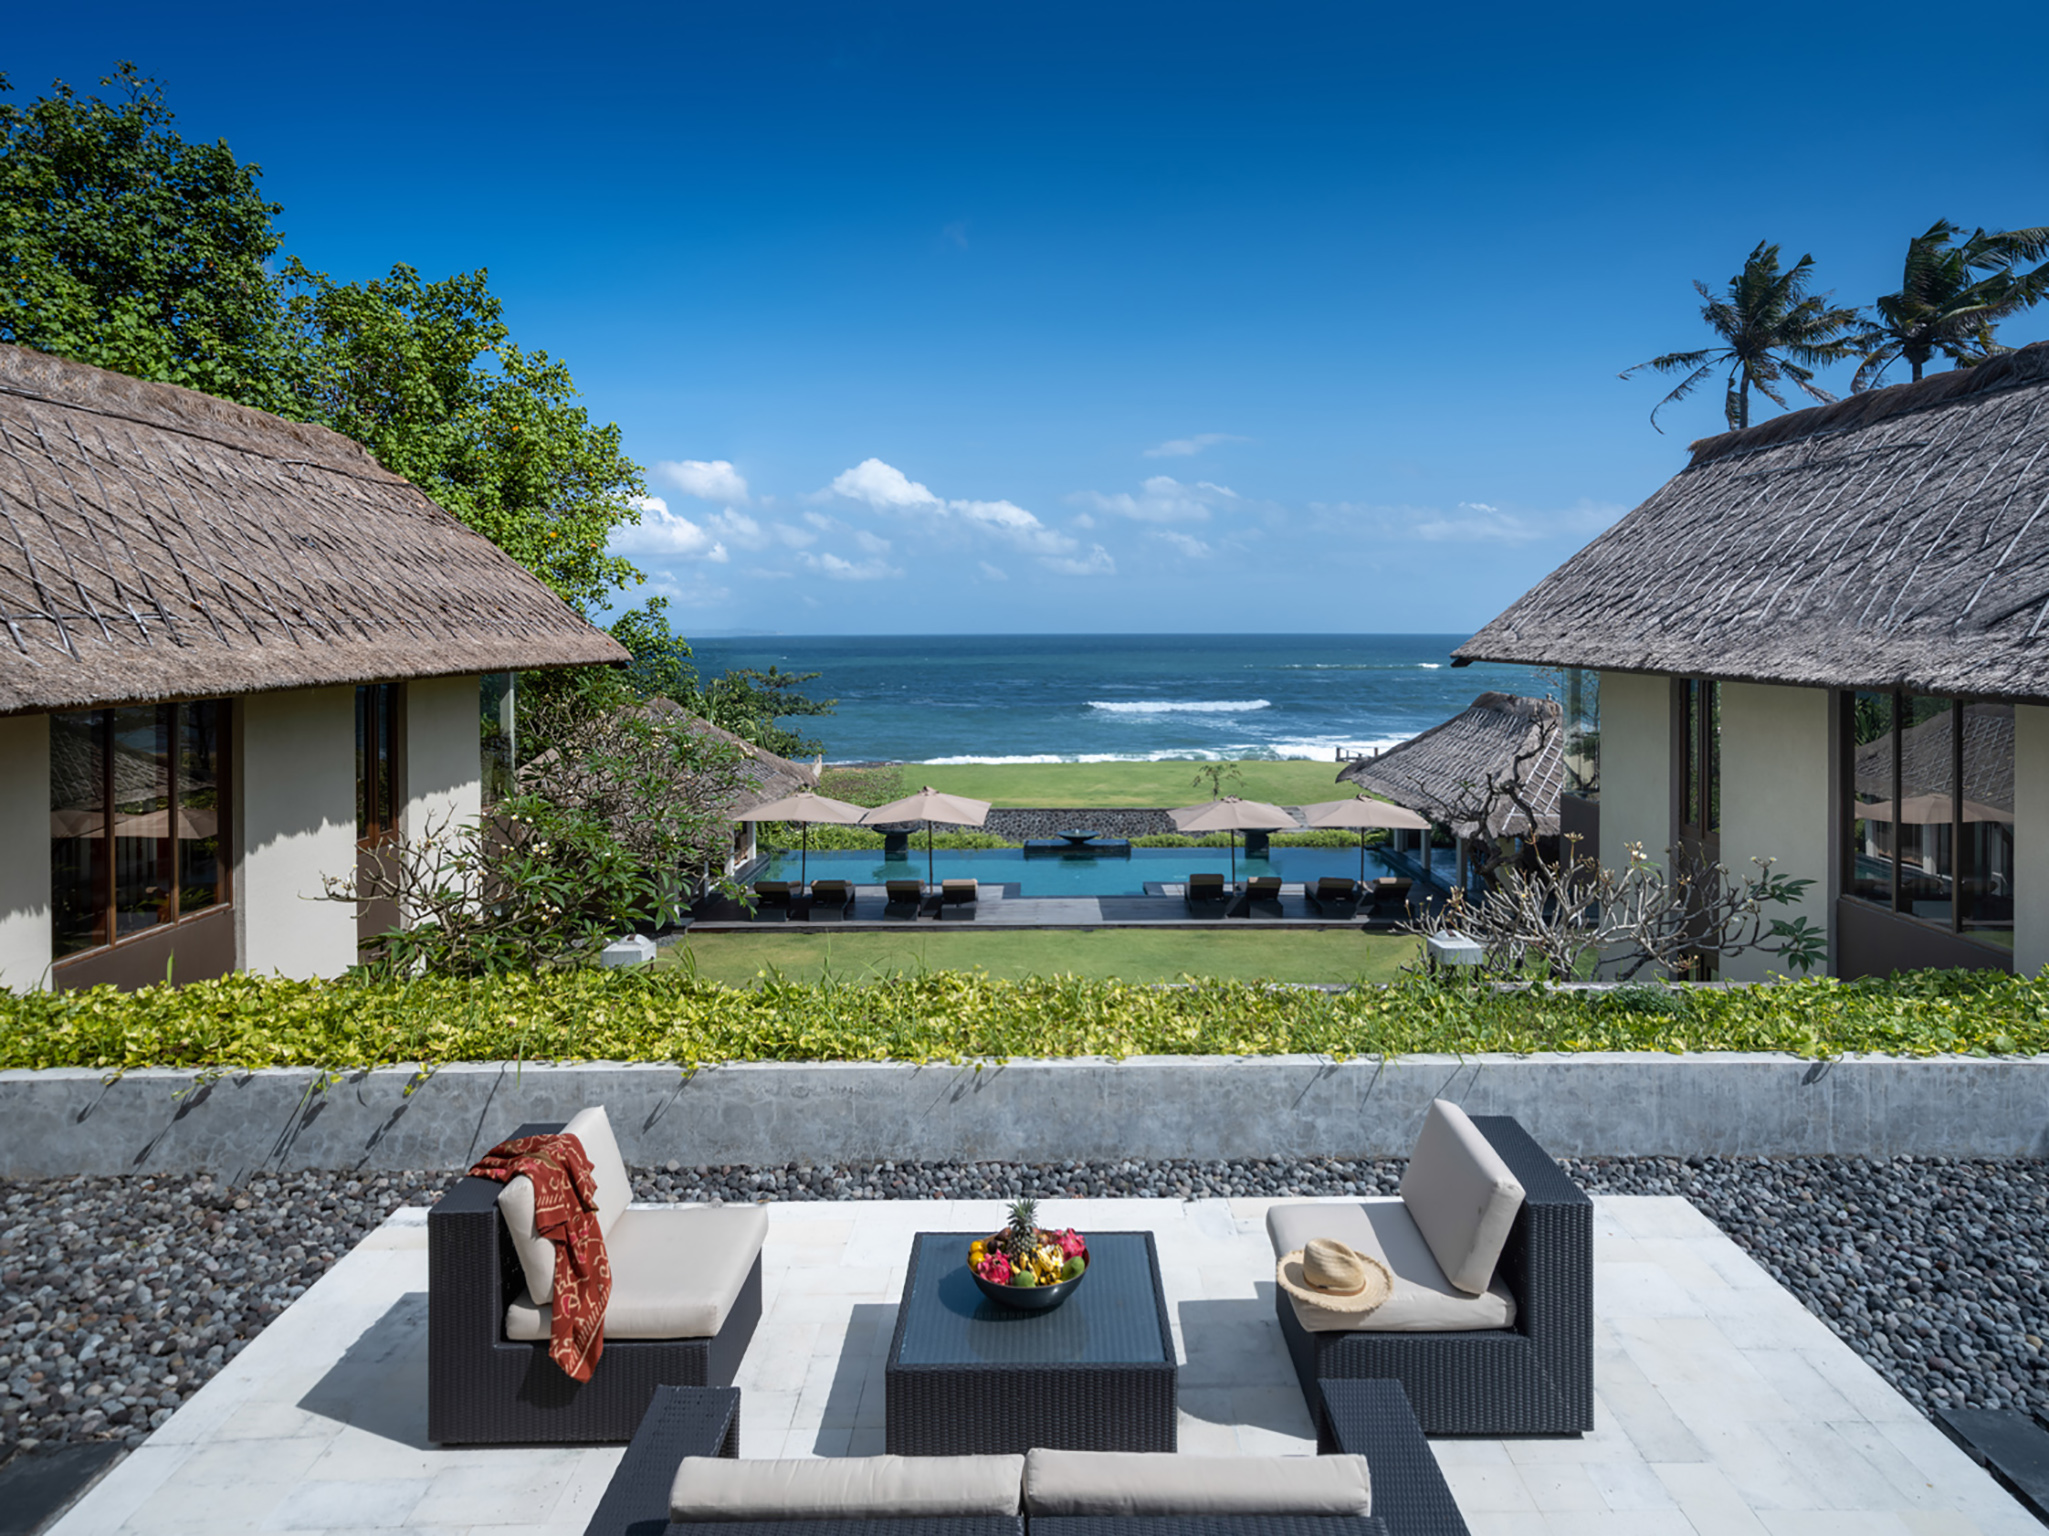 Seseh Beach Villa I - View from the terrace - Seseh Beach Villa I, Seseh-Tanah Lot, Bali